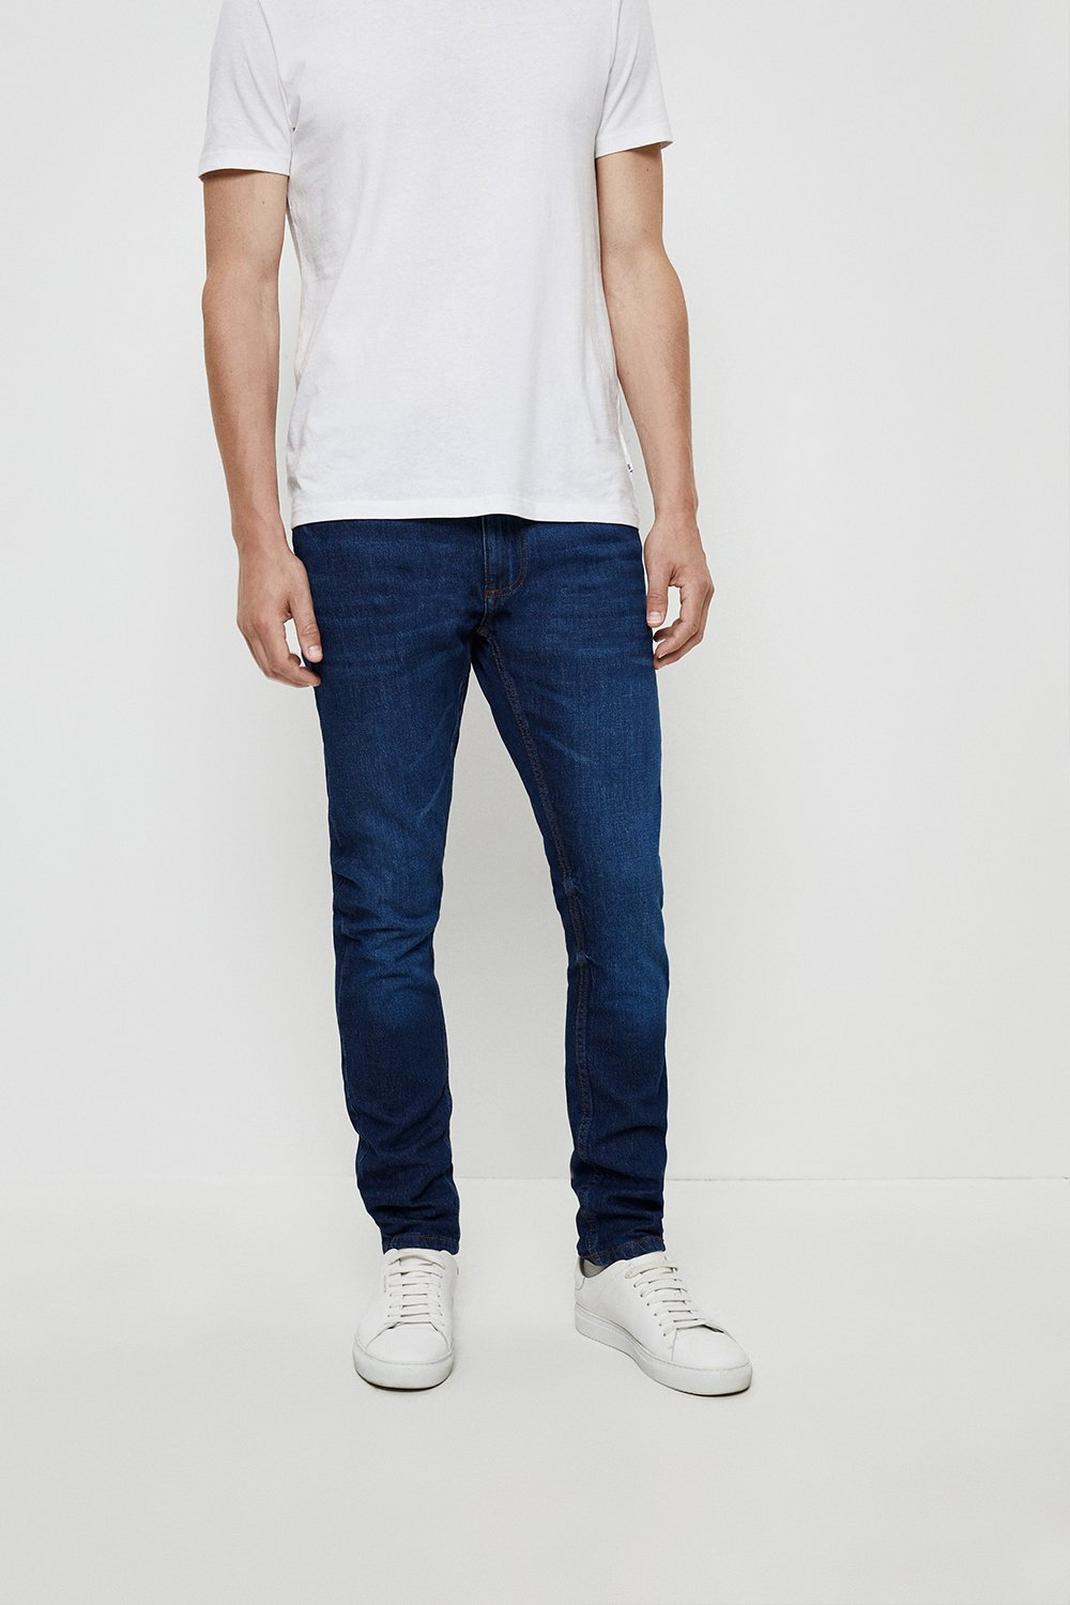 Blue 32                  EU WOMEN FASHION Jeans Straight jeans Basic Pull&Bear straight jeans discount 63% 